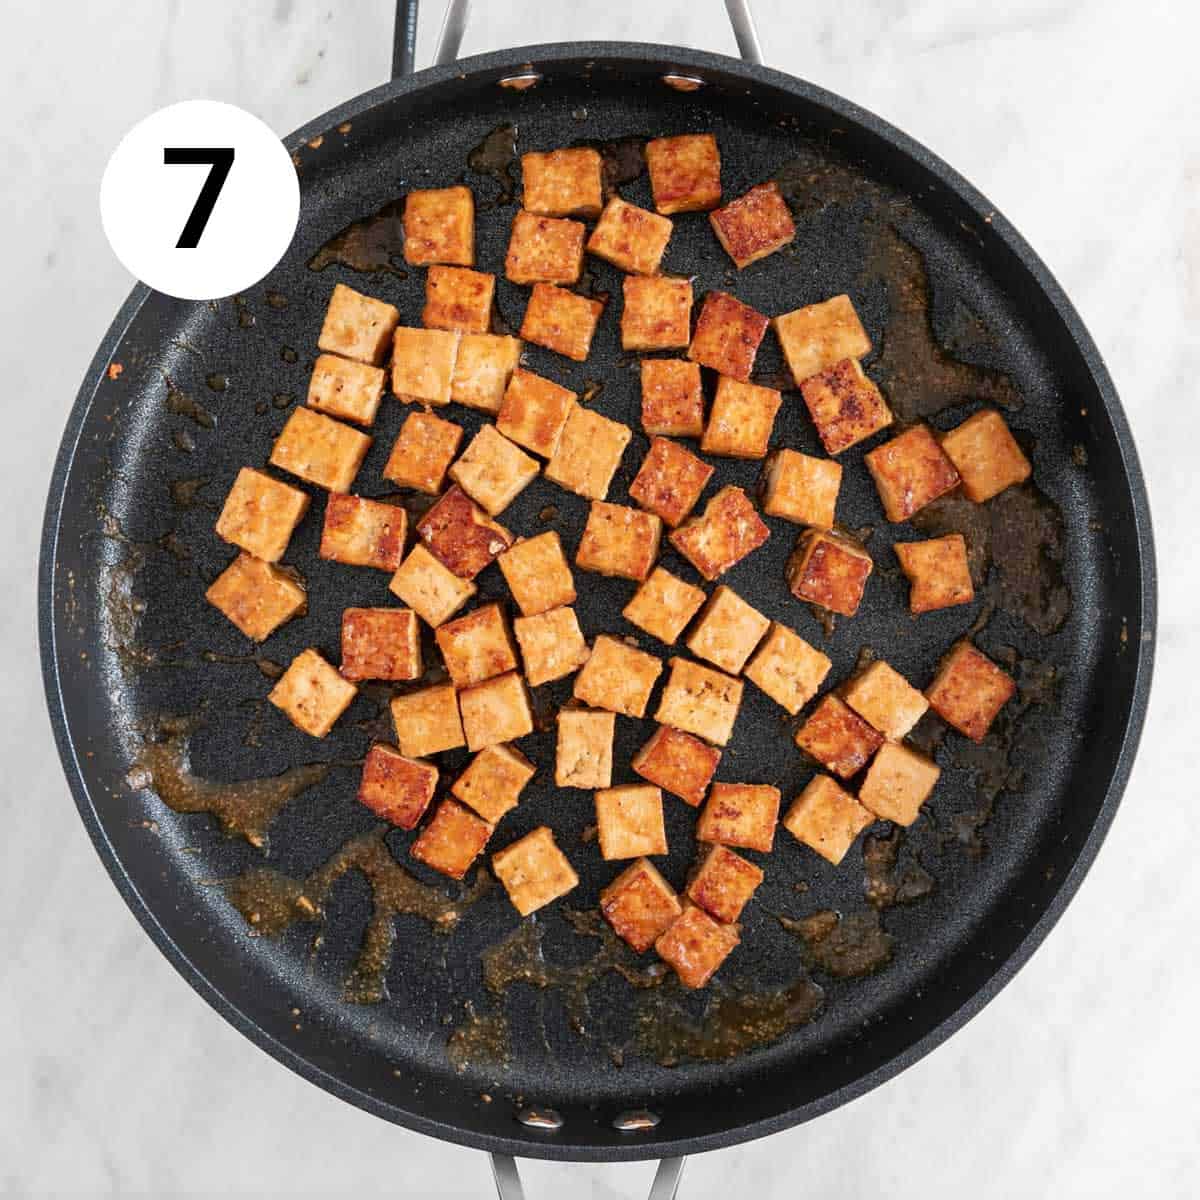 Marinated tofu cooked in a skillet.